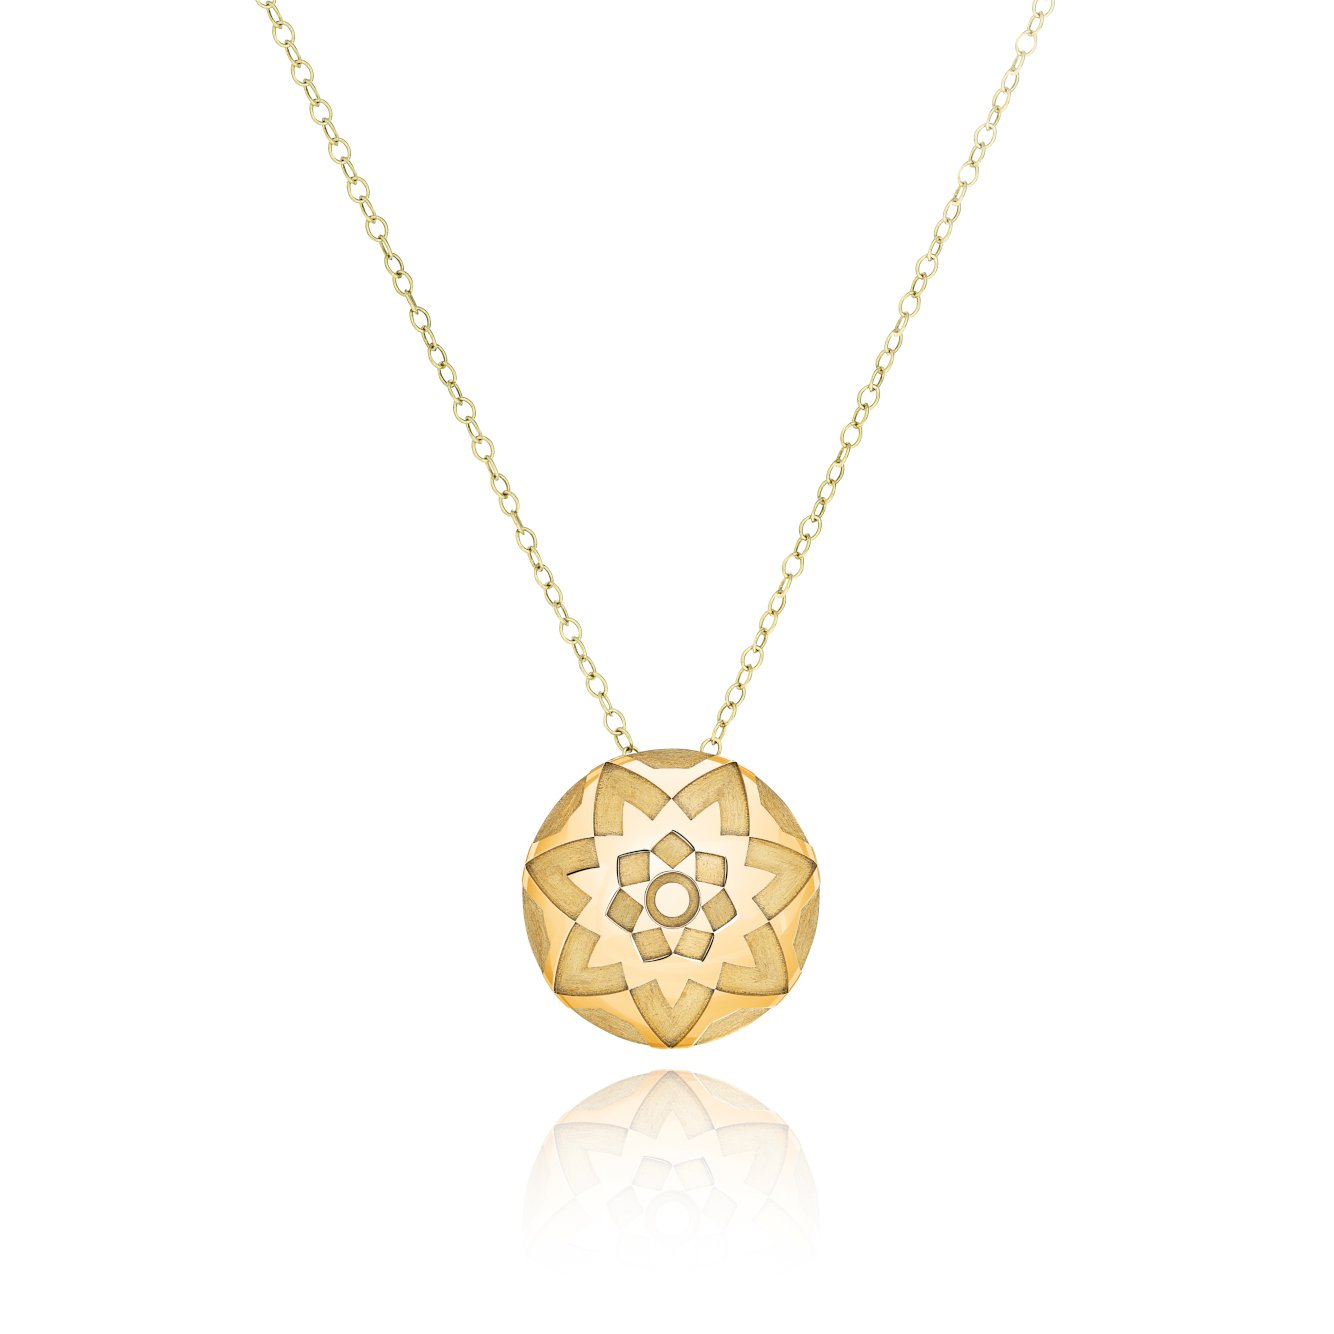 Starburst Necklace - Large - Solid Yellow Gold